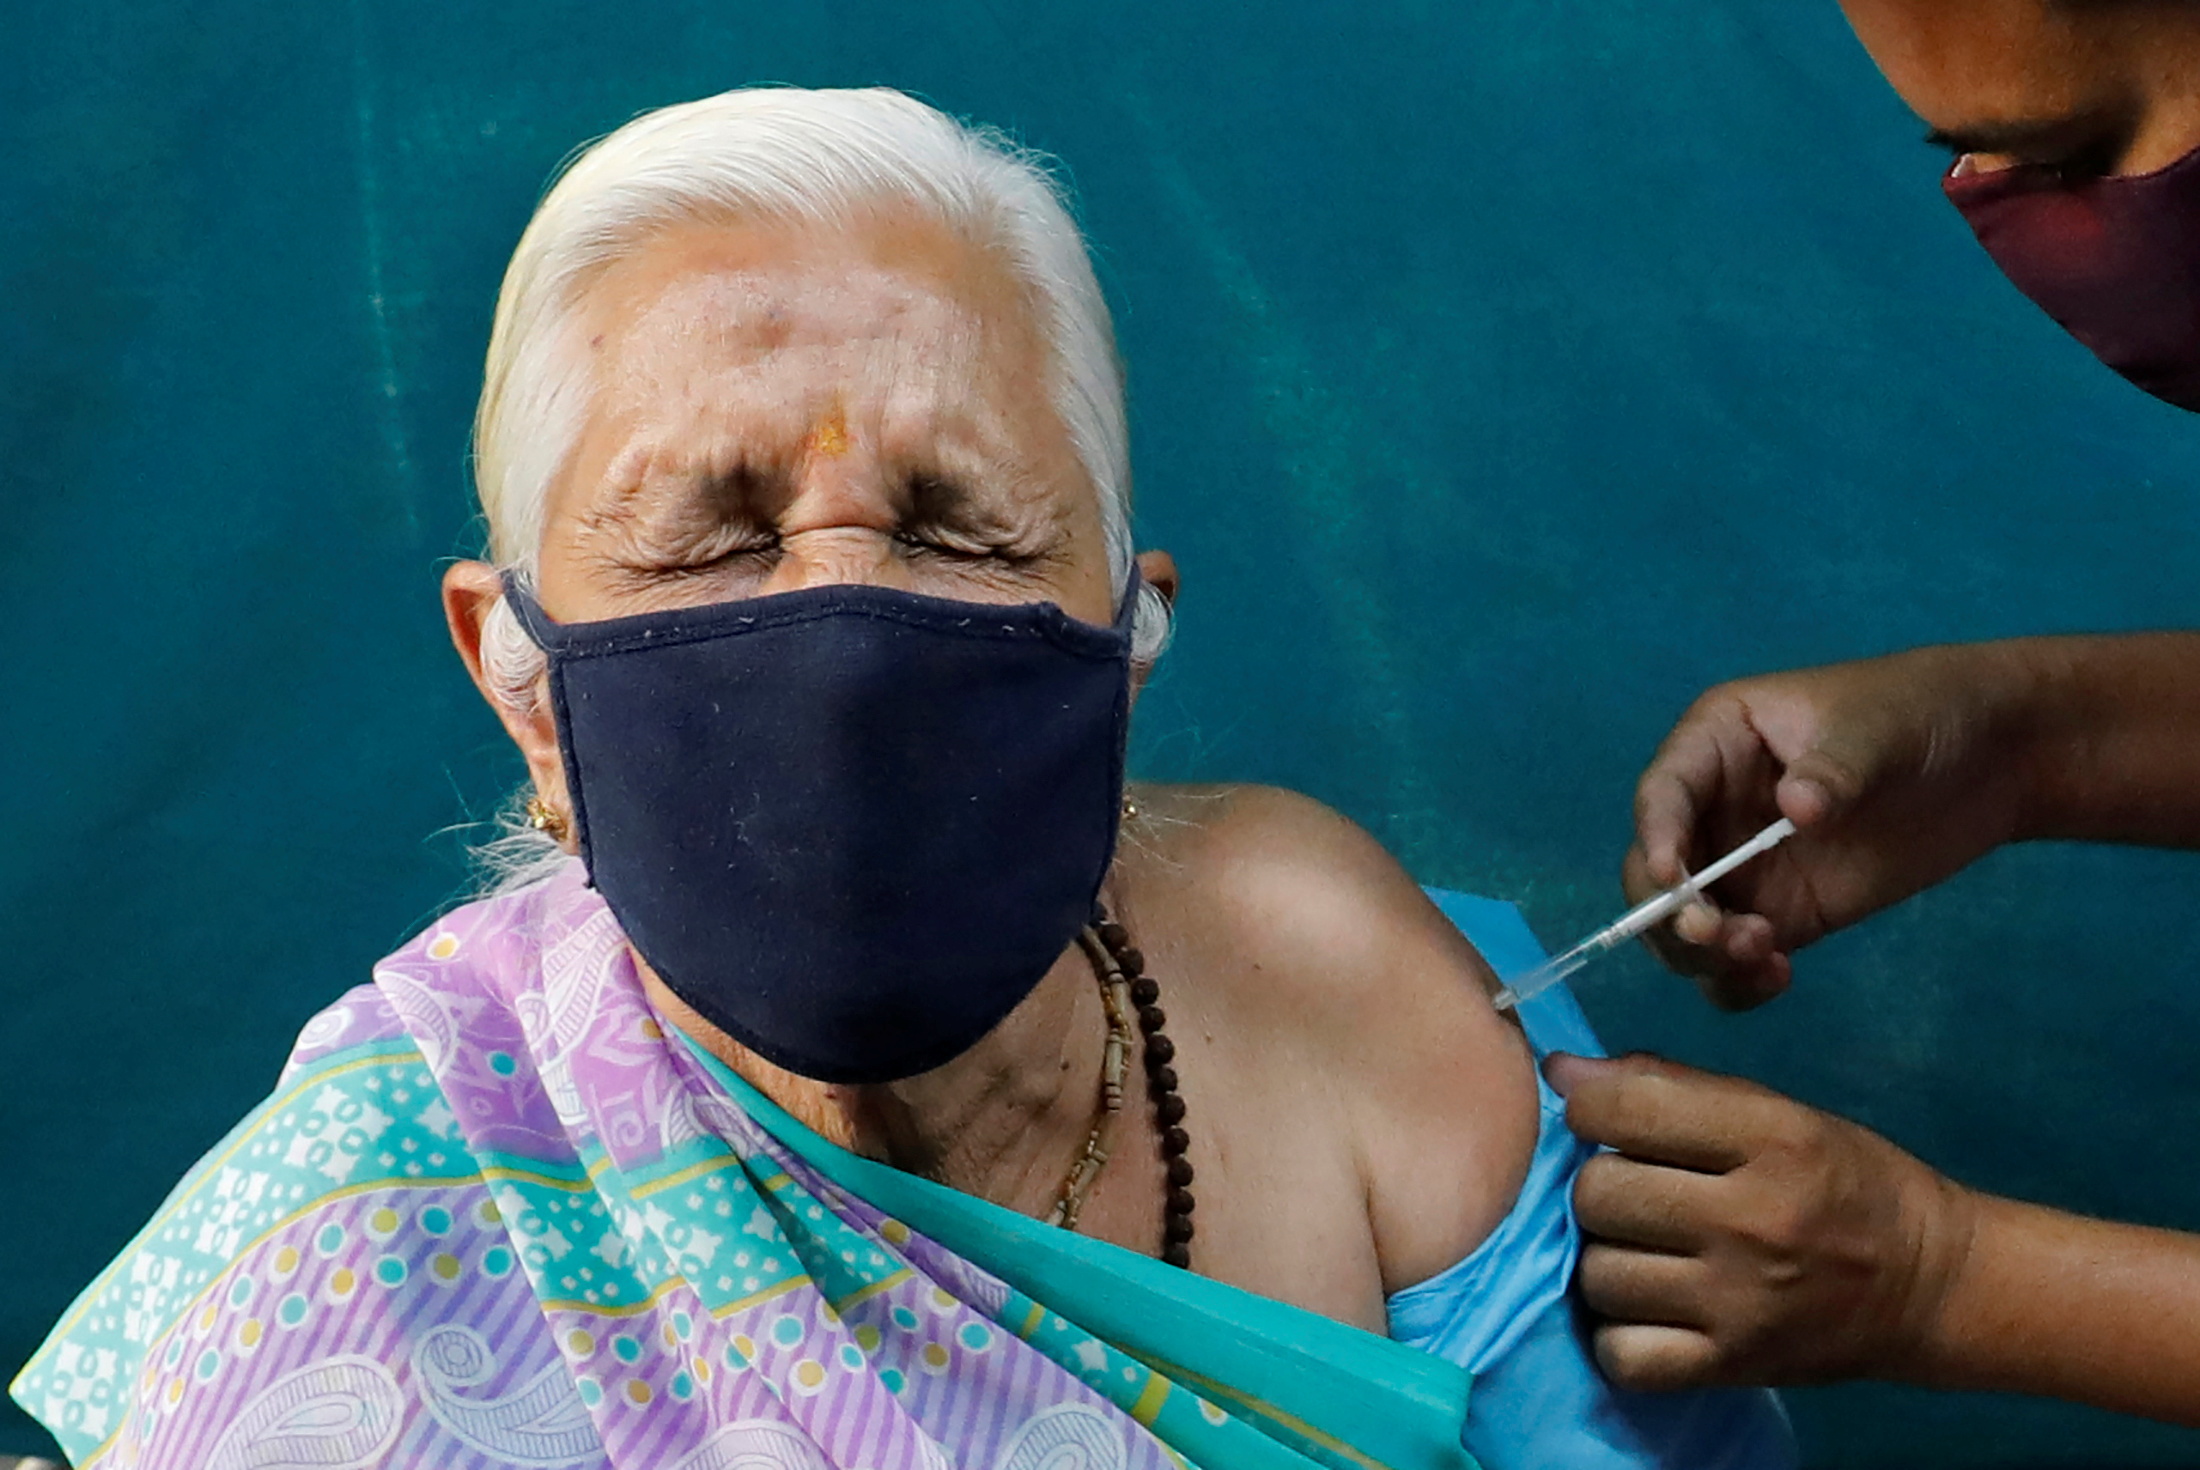 A woman reacts as she receives a dose of COVISHIELD, a coronavirus disease (COVID-19) vaccine, in Ahmedabad